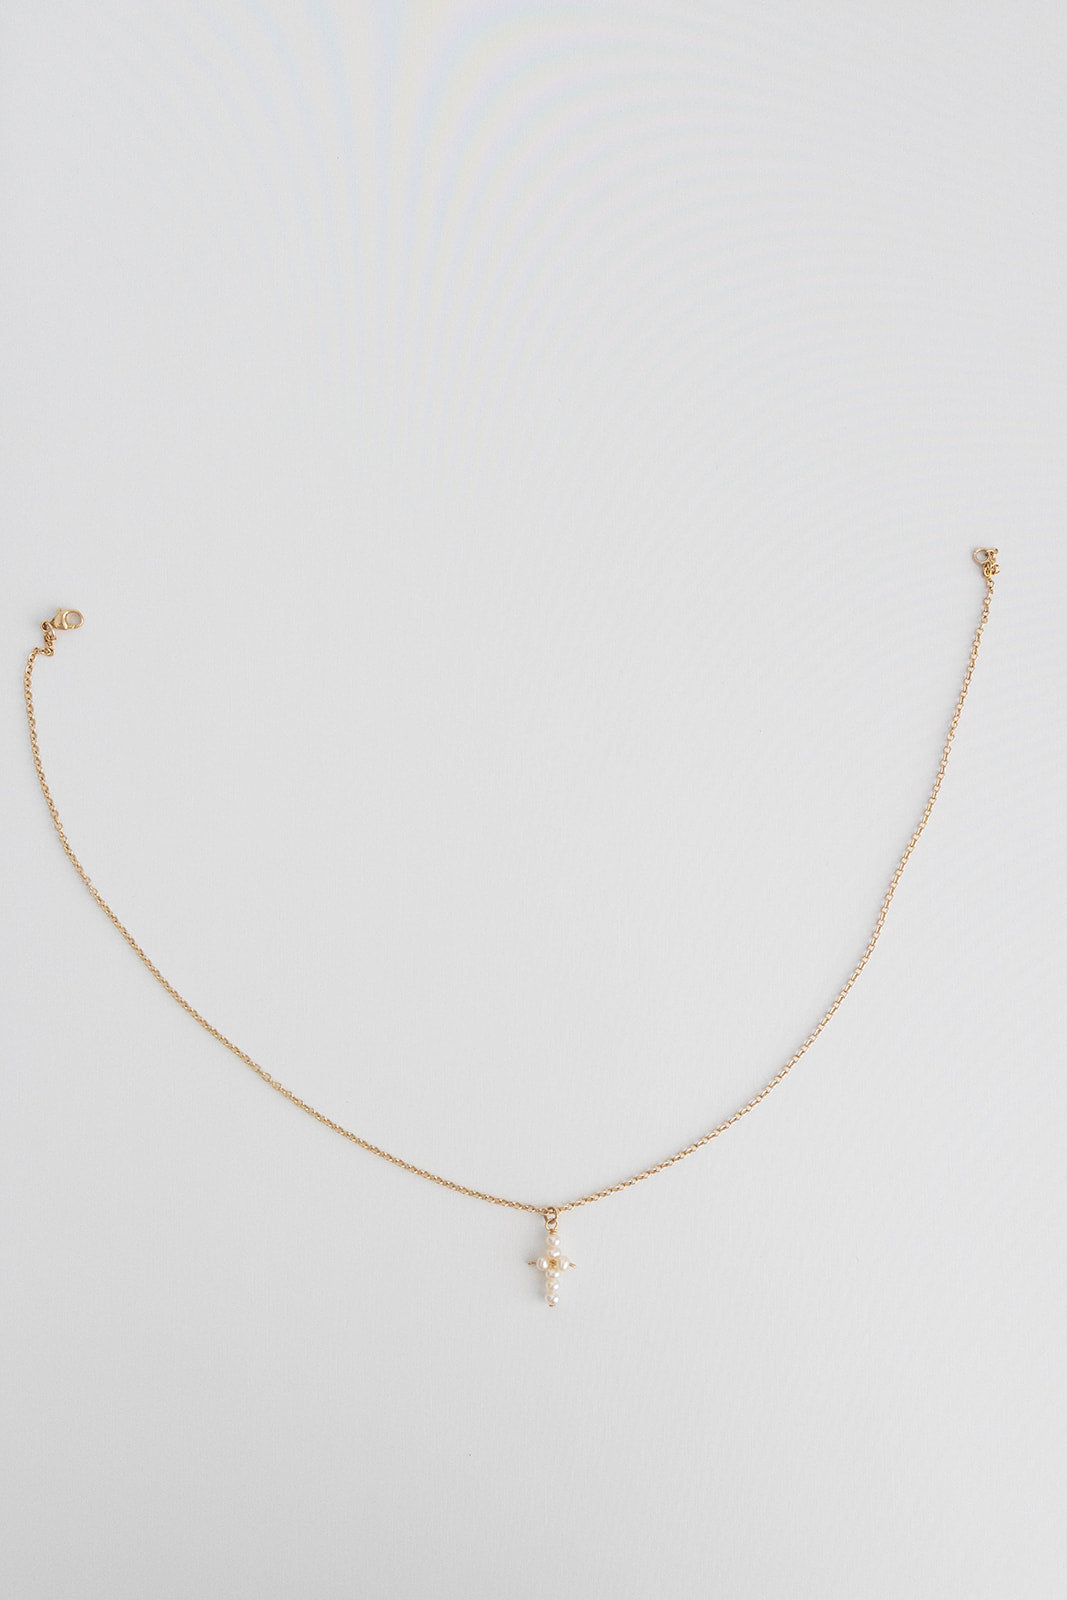 A 14k gold filled cable link chain necklace with freshwater pearls connected in the shape of a cross lays on a white background.